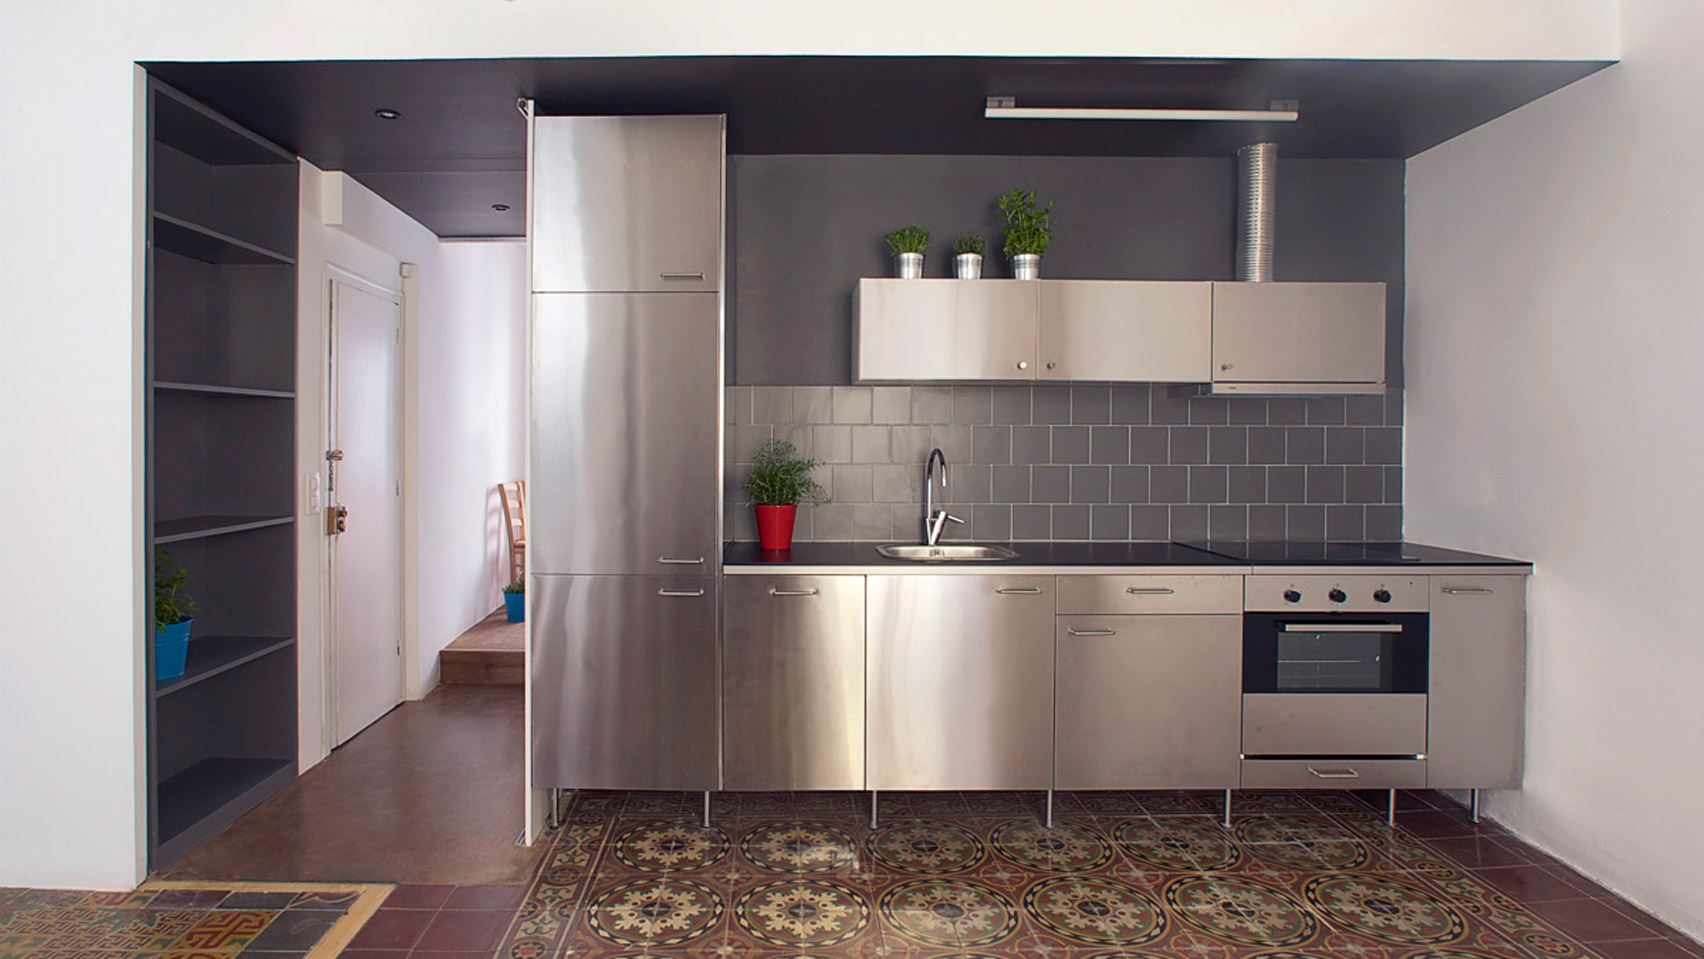 Ten steely kitchens that use metal as their primary material